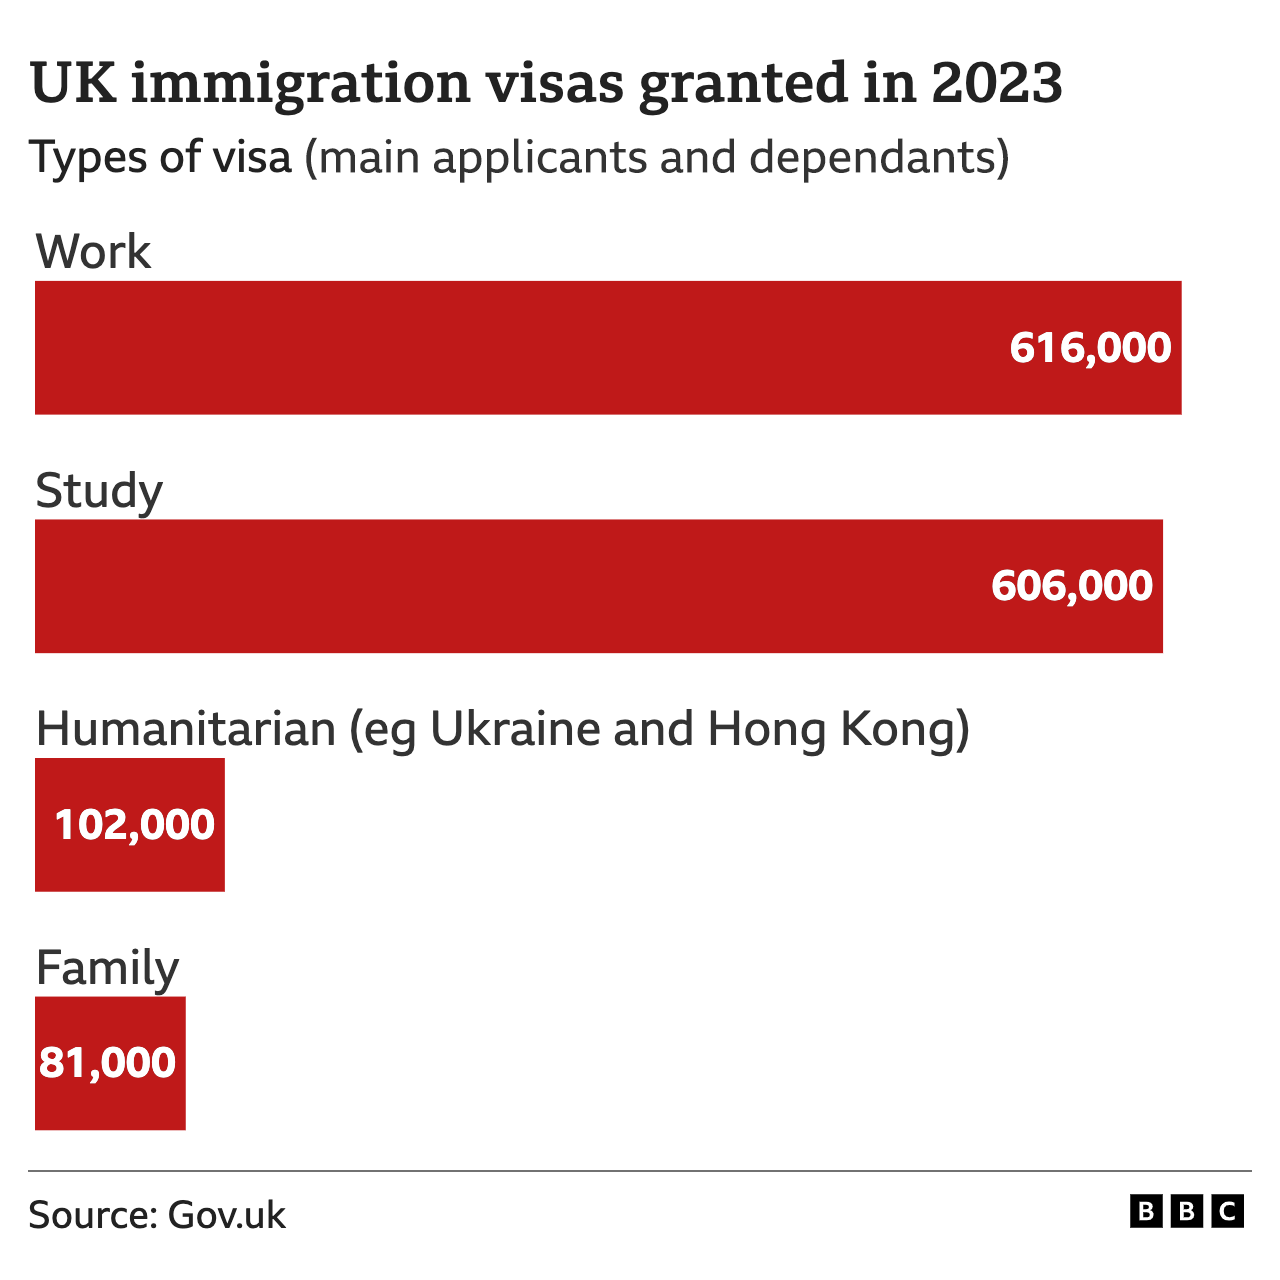 UK immigration visas granted in 2023